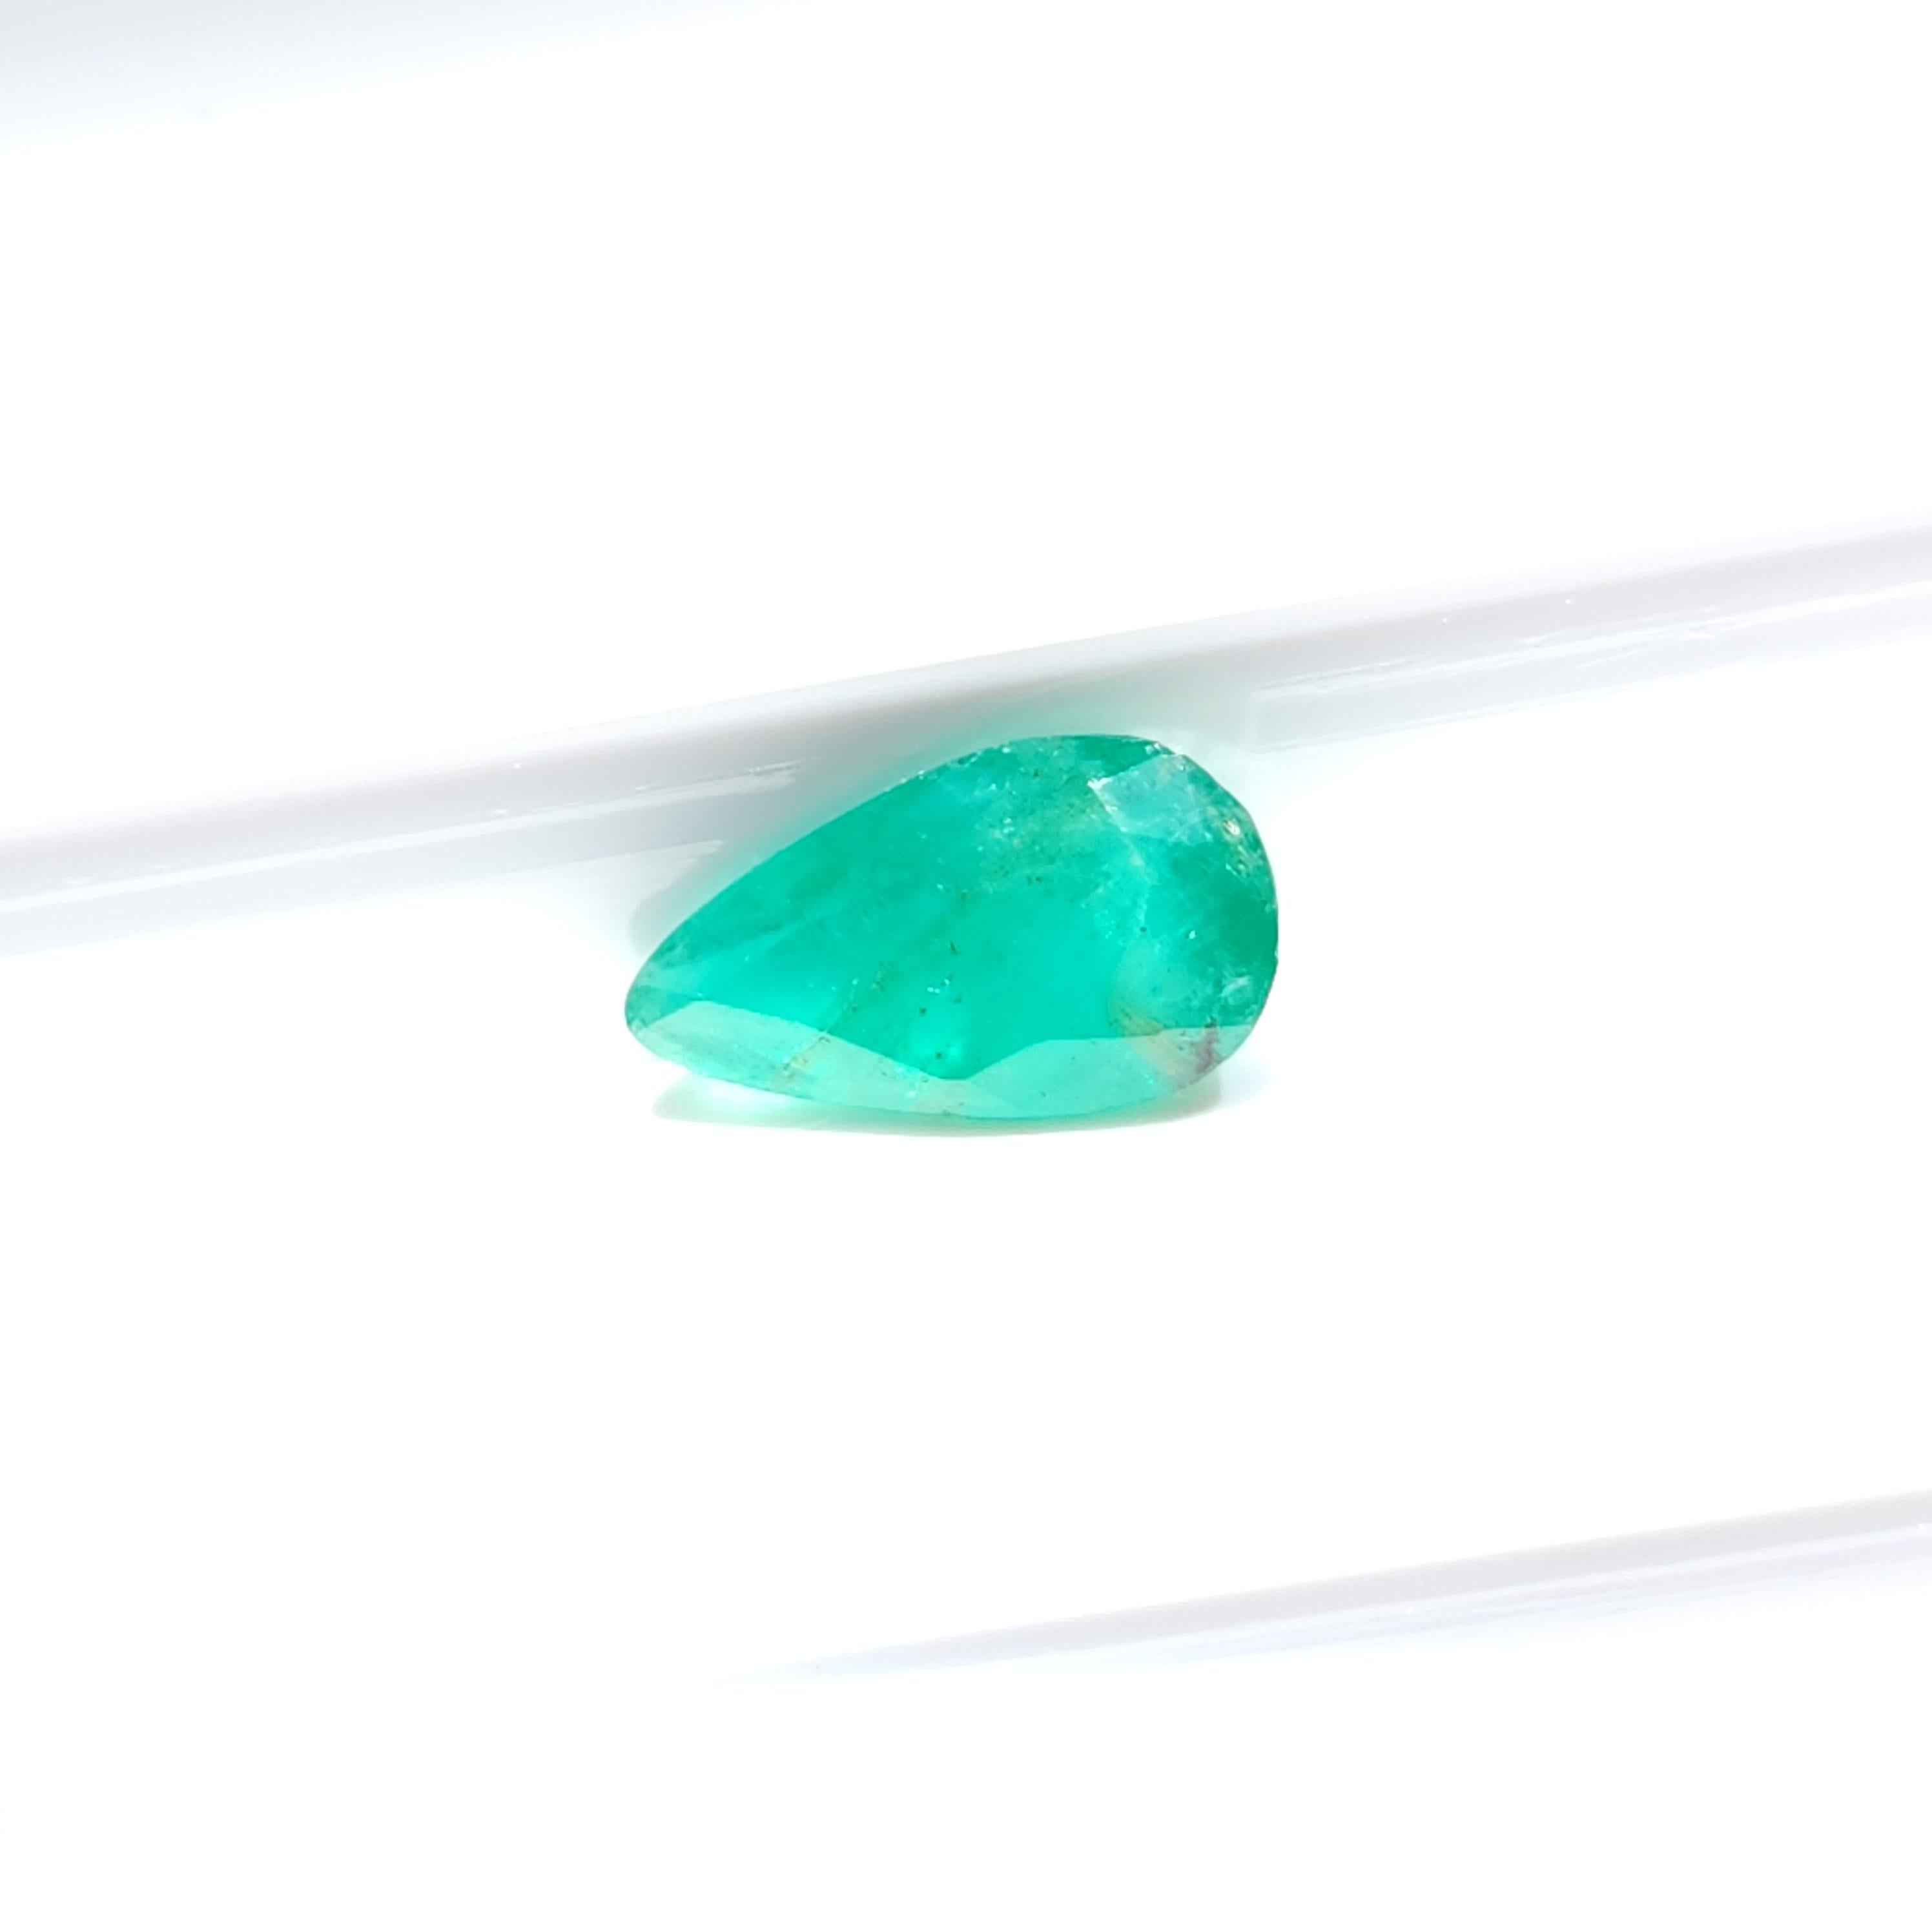 Elegant 0.79ct Loose Pear Shape Colombian Emerald Gemstone

Product Description:

Unveiling our captivating 0.79ct loose Pear Shape Colombian Emerald gemstone, a genuine reflection of Colombia's verdant heart and nature's impeccable craftsmanship.